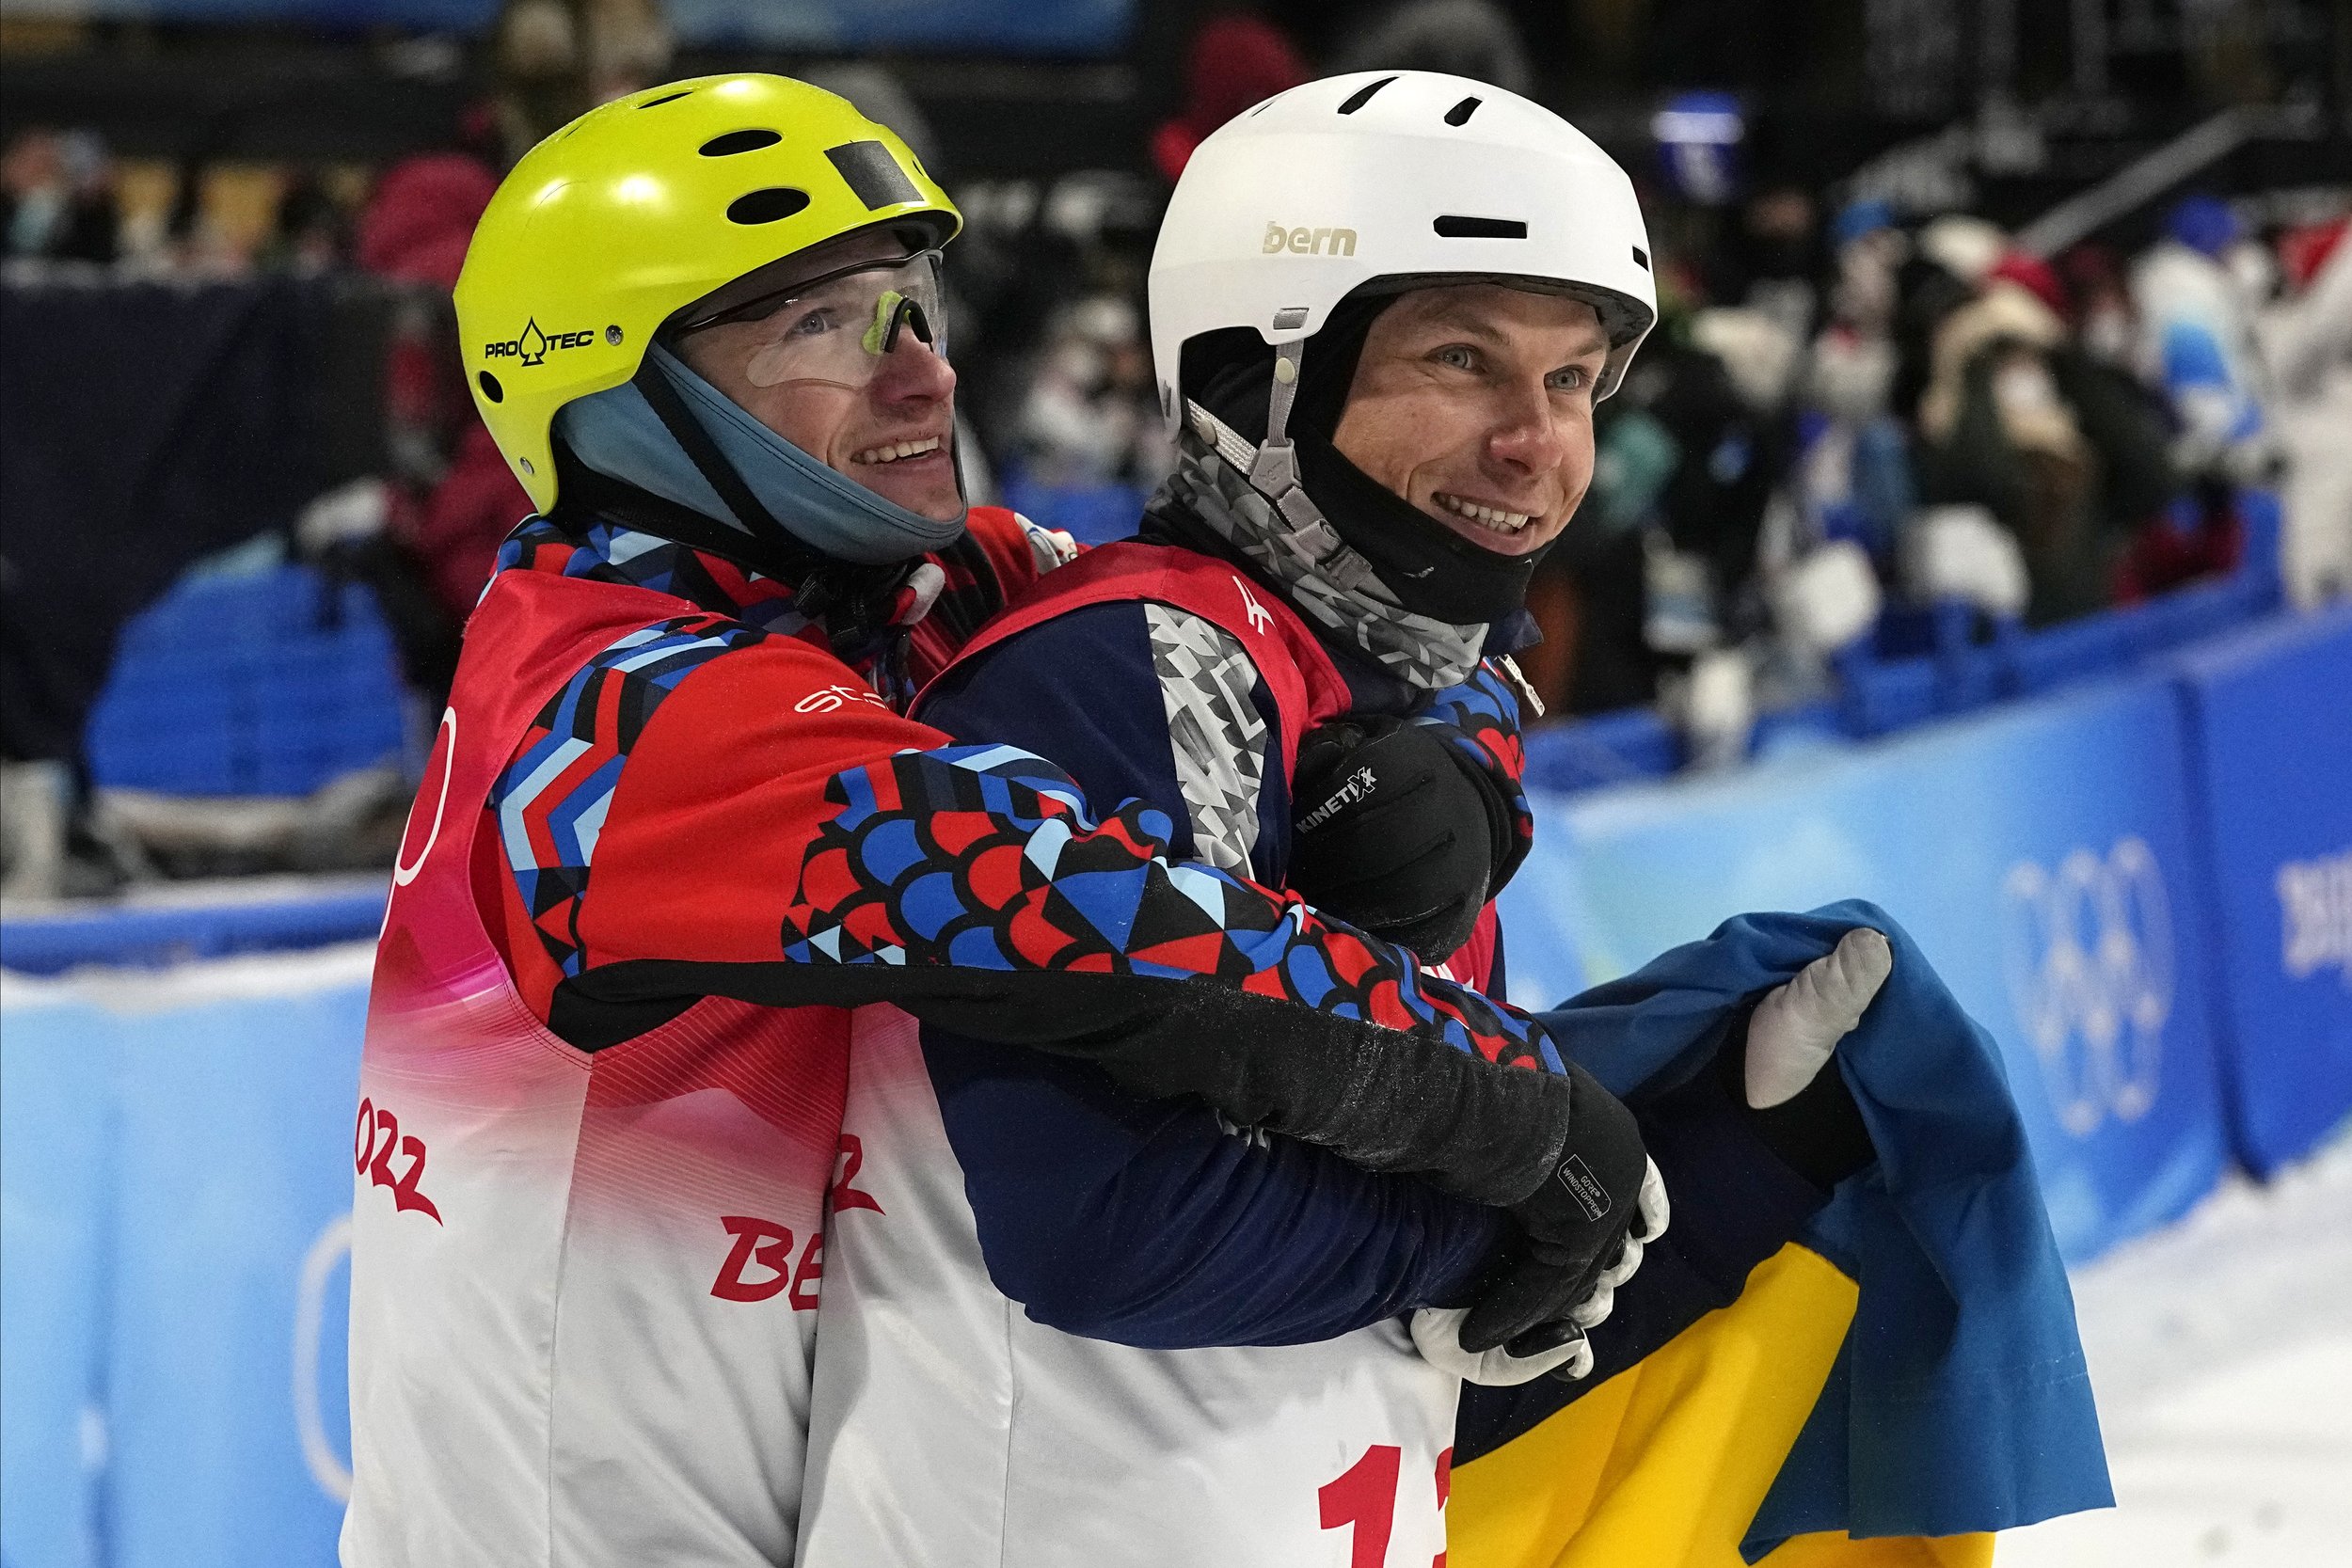  Bronze medal winner Ilia Burov, of the Russian Olympic Committee, left, hugs silver medal winner Ukraine's Oleksandr Abramenko as they celebrate after the men's aerials finals at the 2022 Winter Olympics, Wednesday, Feb. 16, 2022, in Zhangjiakou, Ch